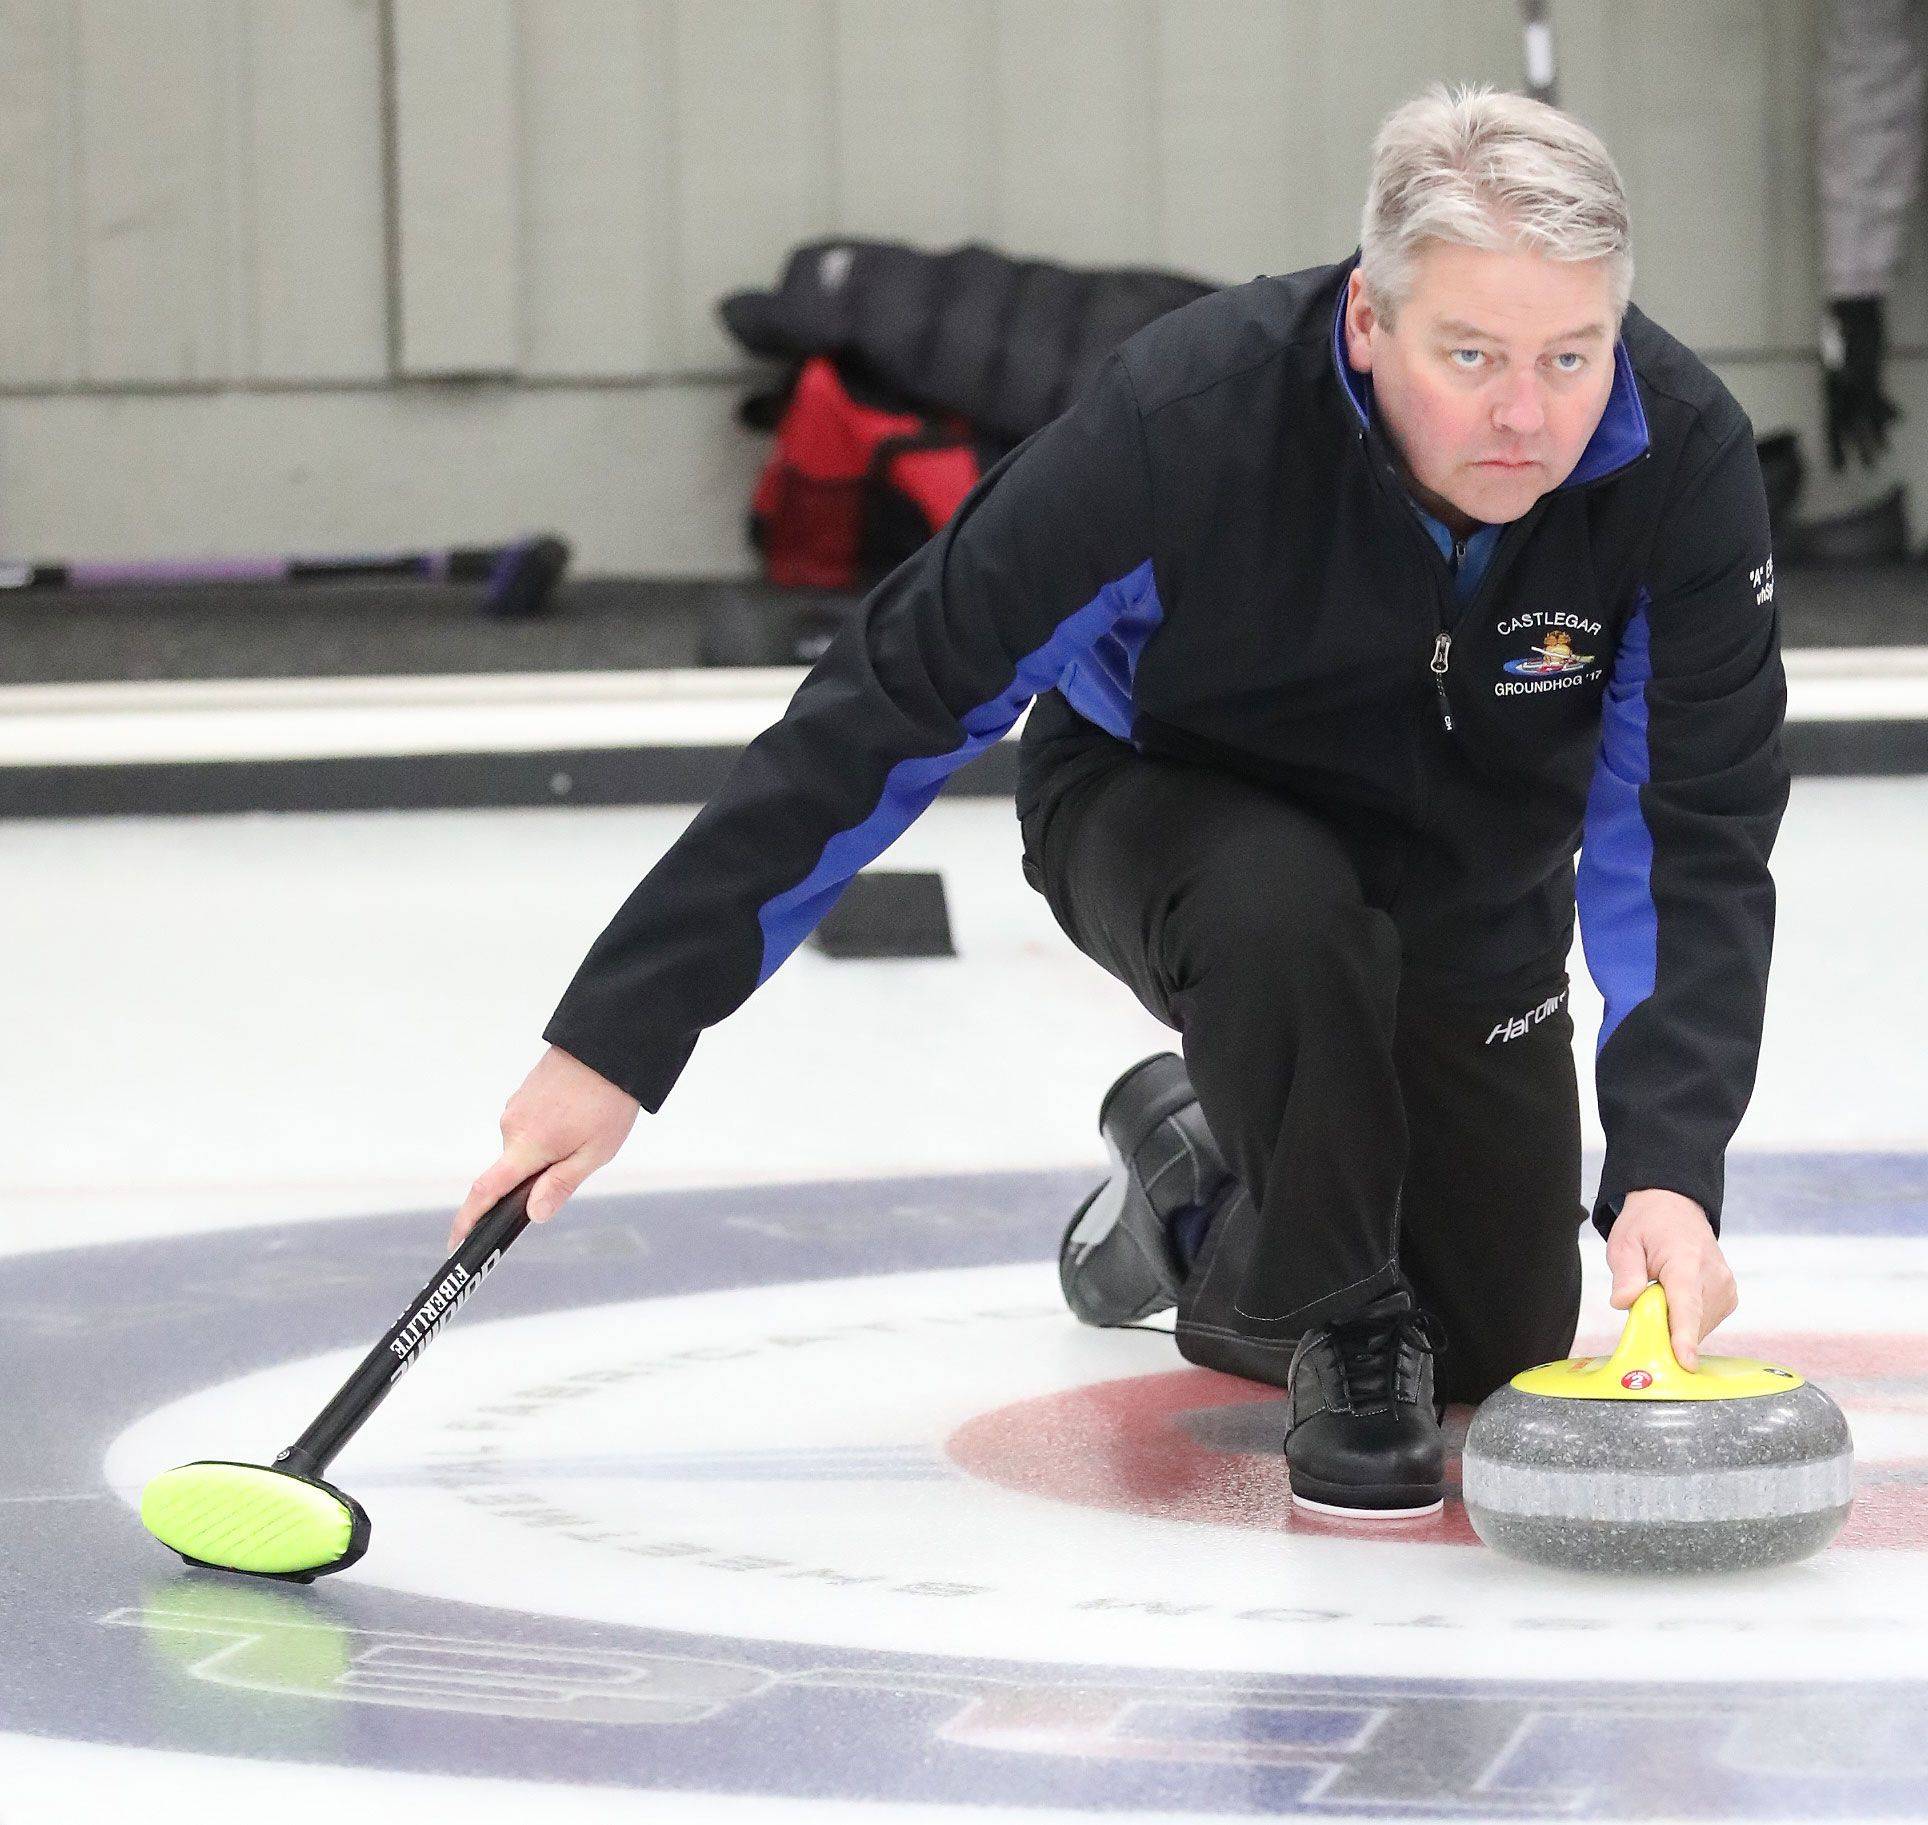 20225956_web1_200123-CAN-Curling_5